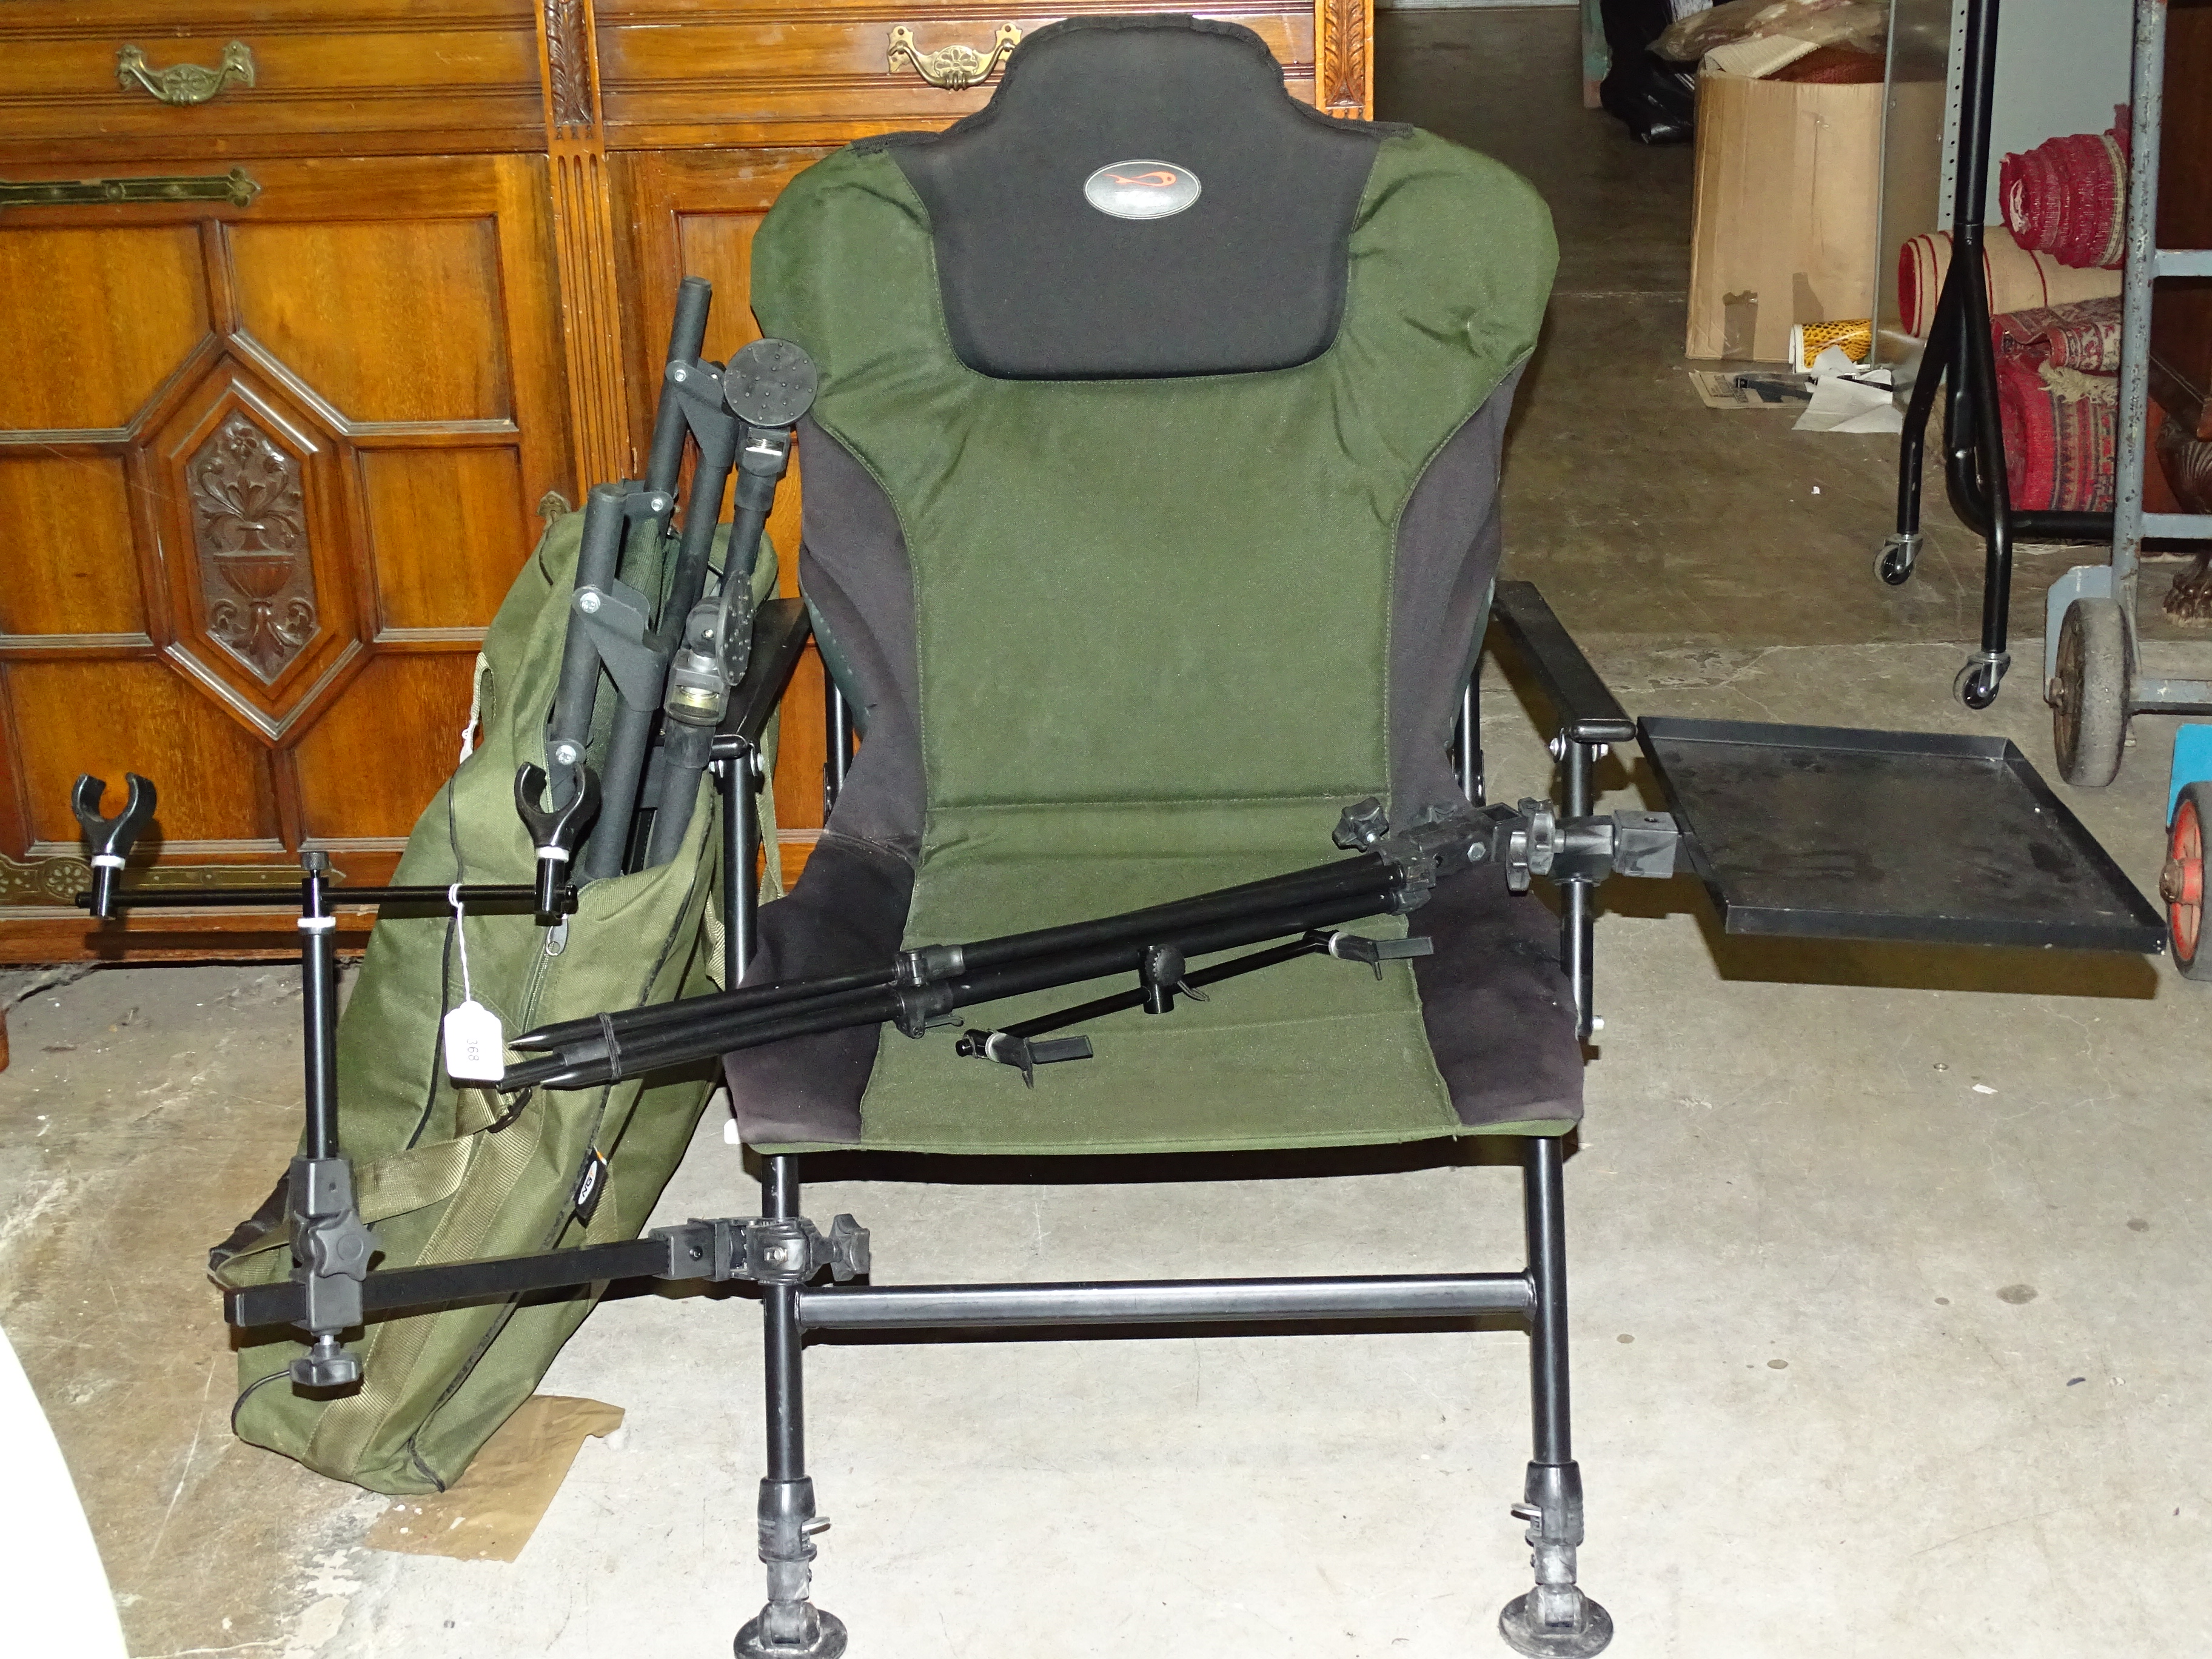 A TF Gear fishing seat with adjustable legs, tray and rod holders.